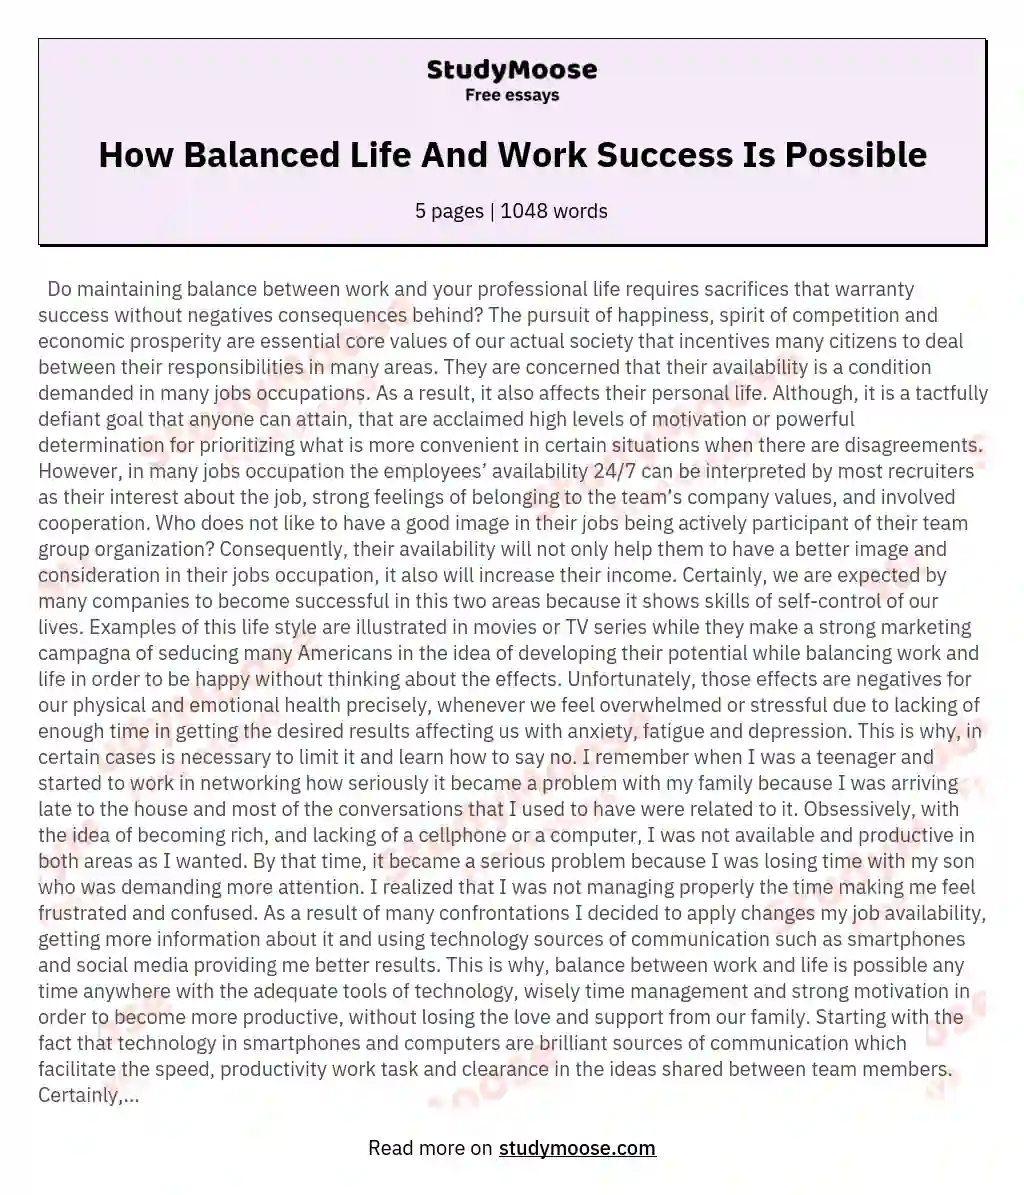 How Balanced Life And Work Success Is Possible essay